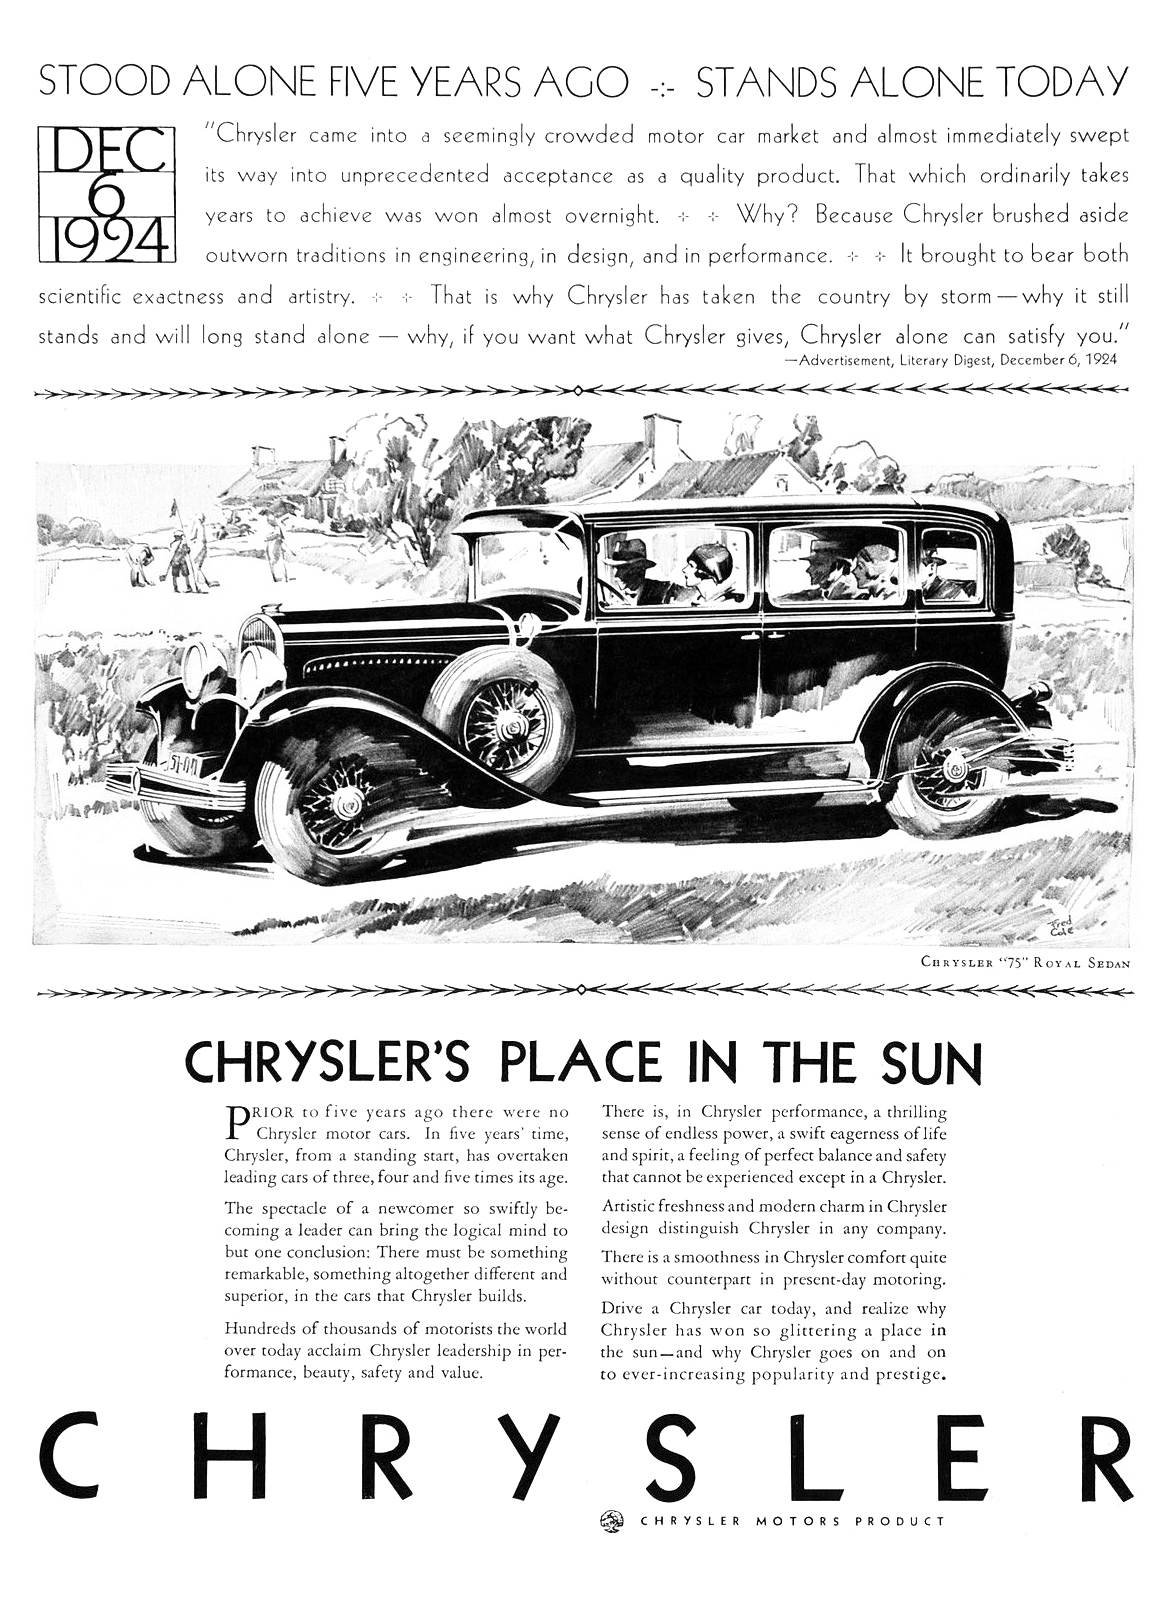 Chrysler "75" Royal Sedan Ad (January, 1929) - Illustrated by Fred Cole